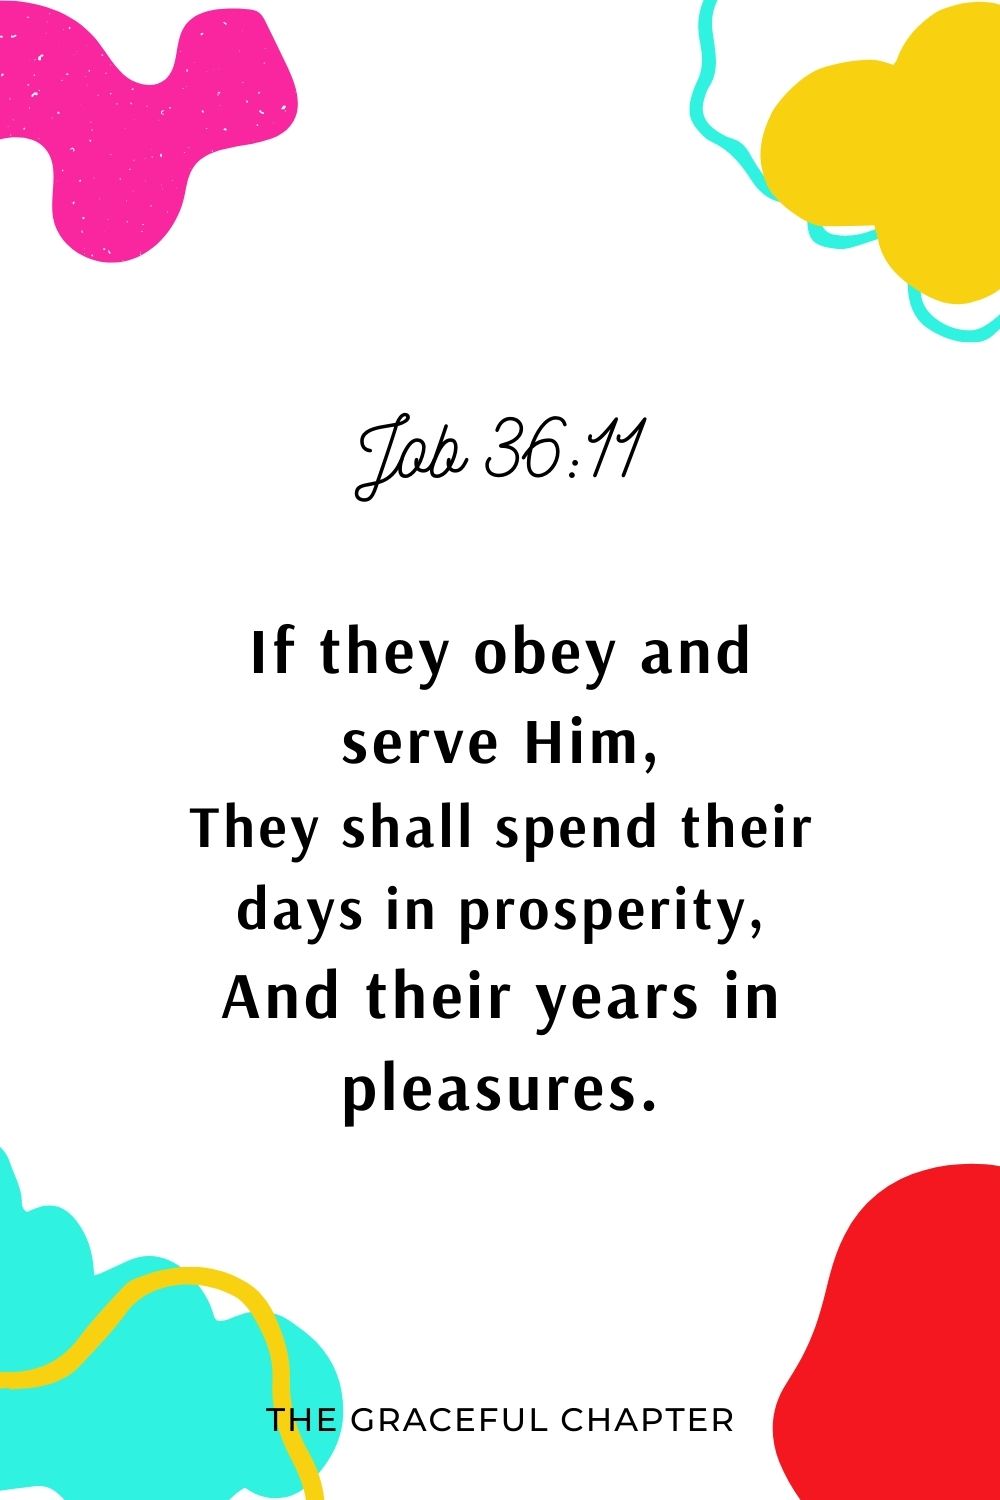 If they obey and serve Him, They shall spend their days in prosperity, And their years in pleasures. Job 36:11